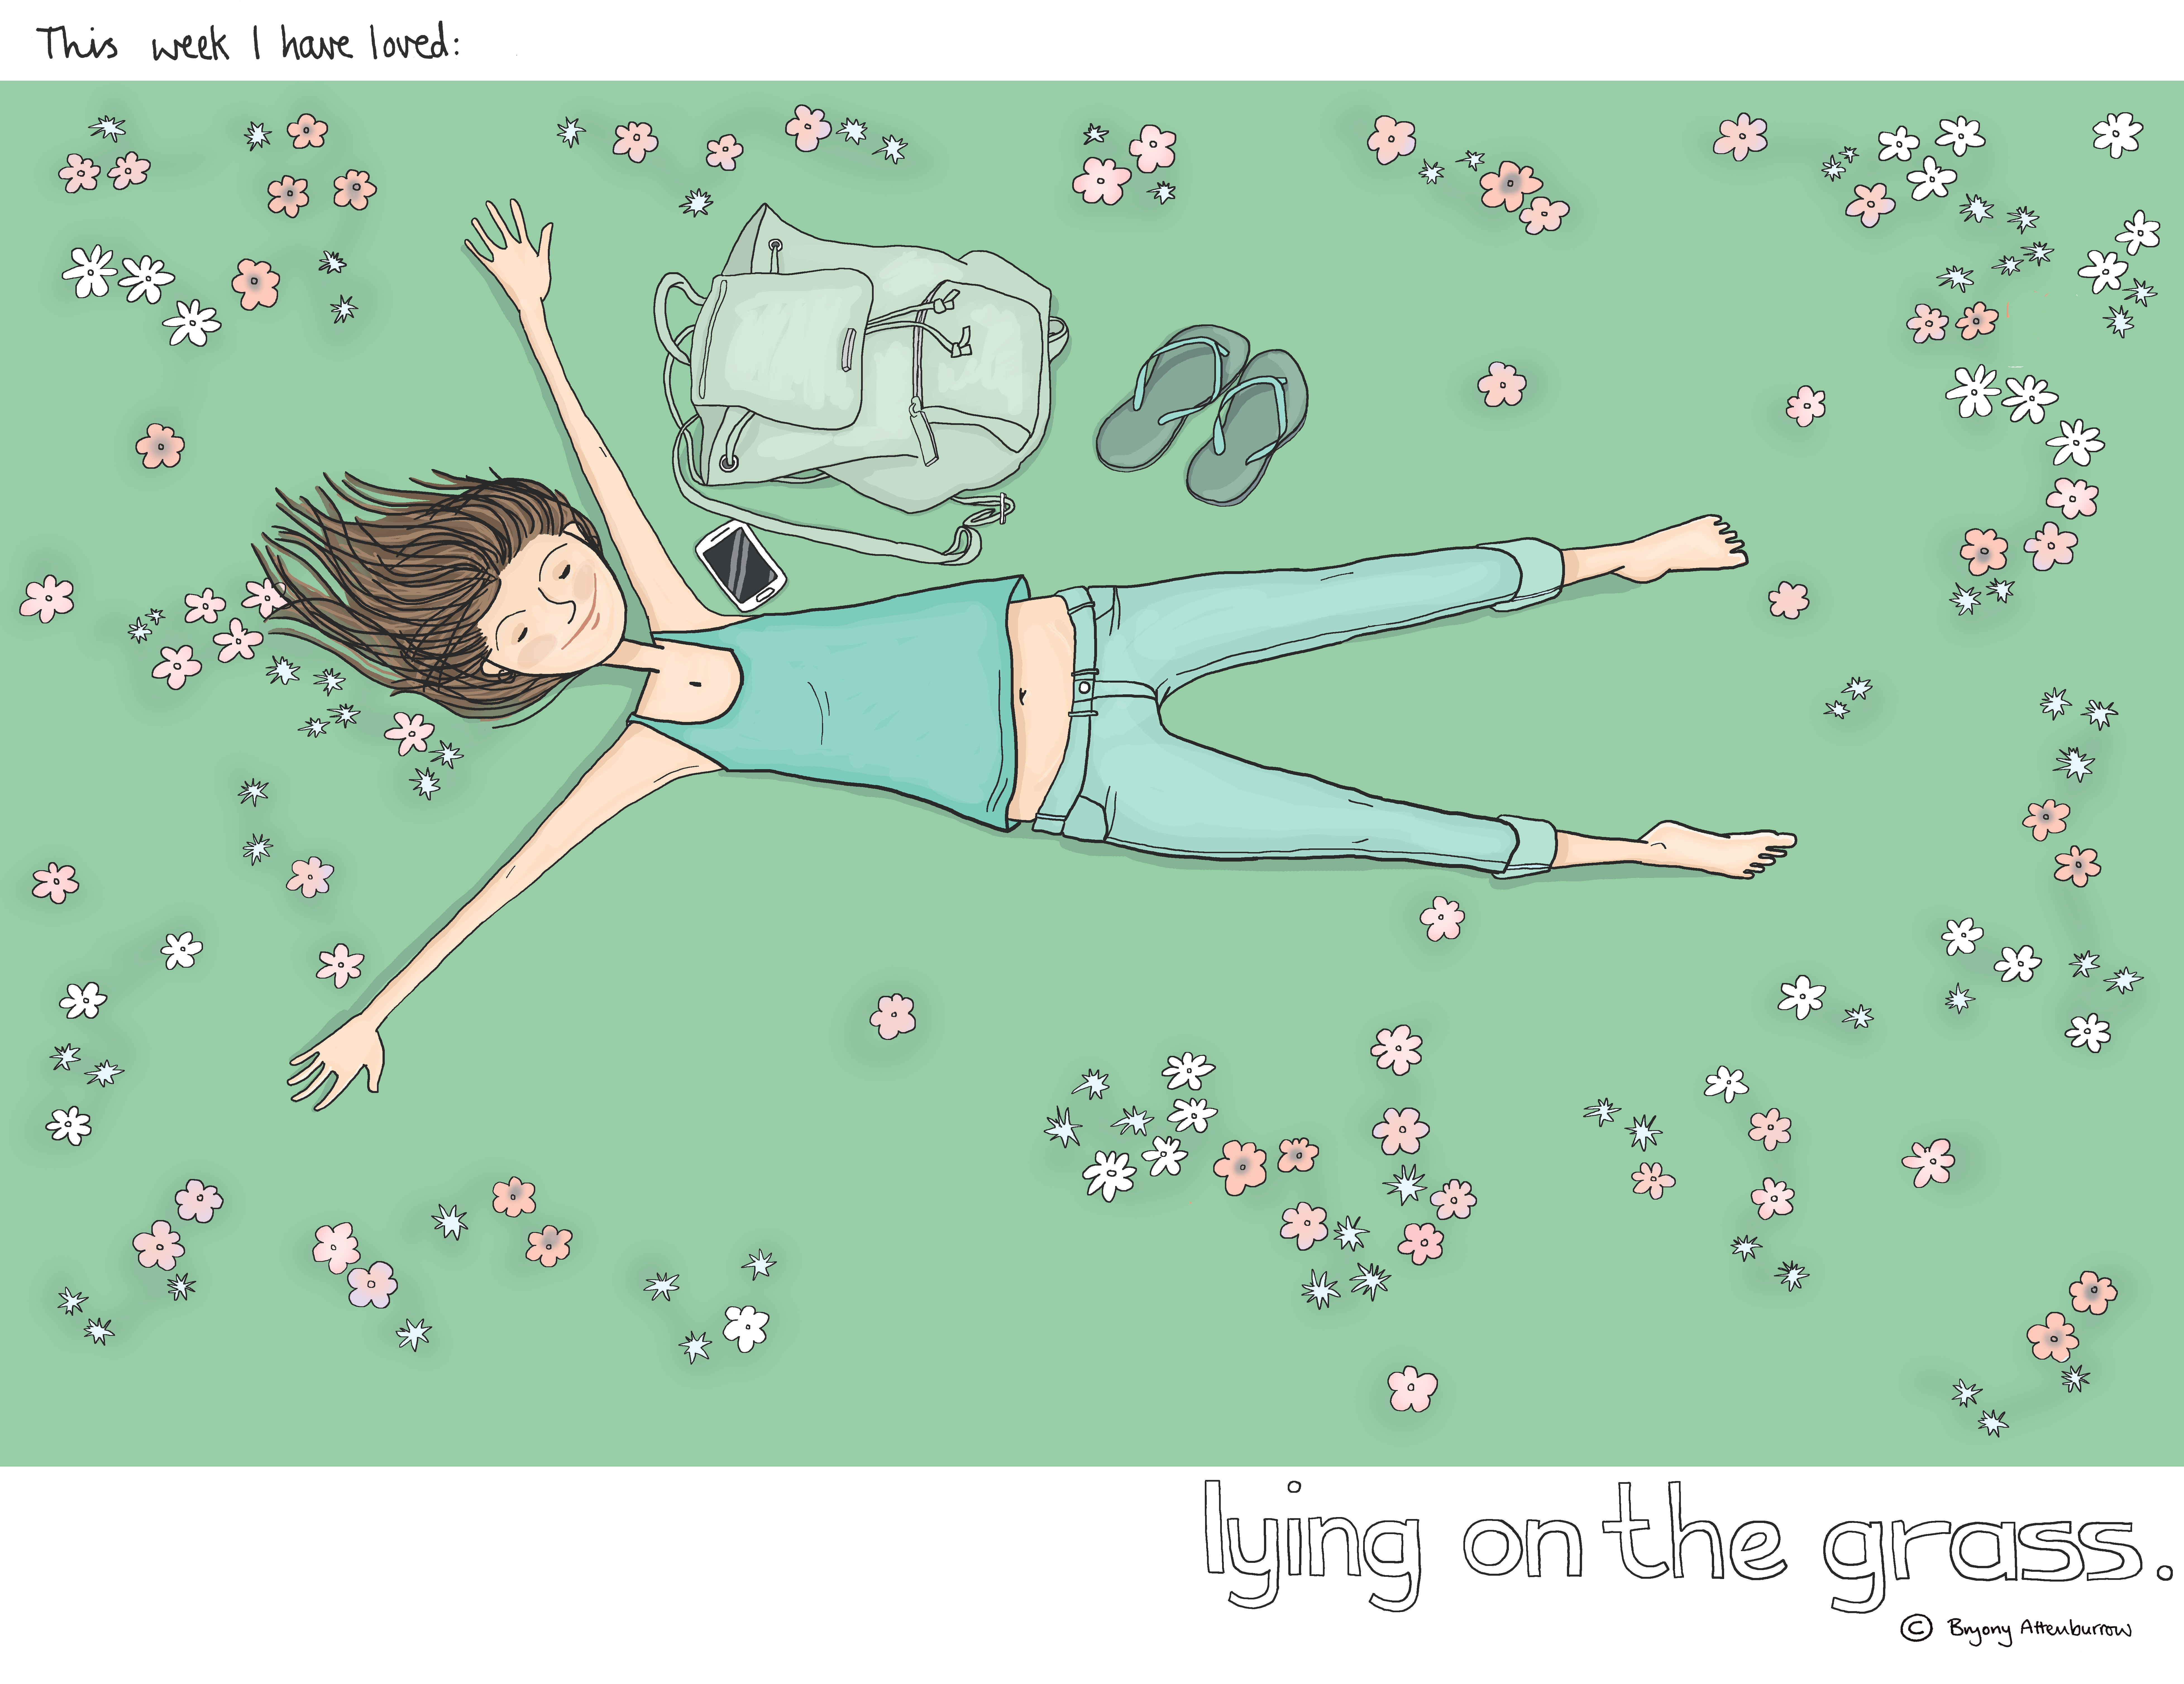 18 this week - lying on the grass